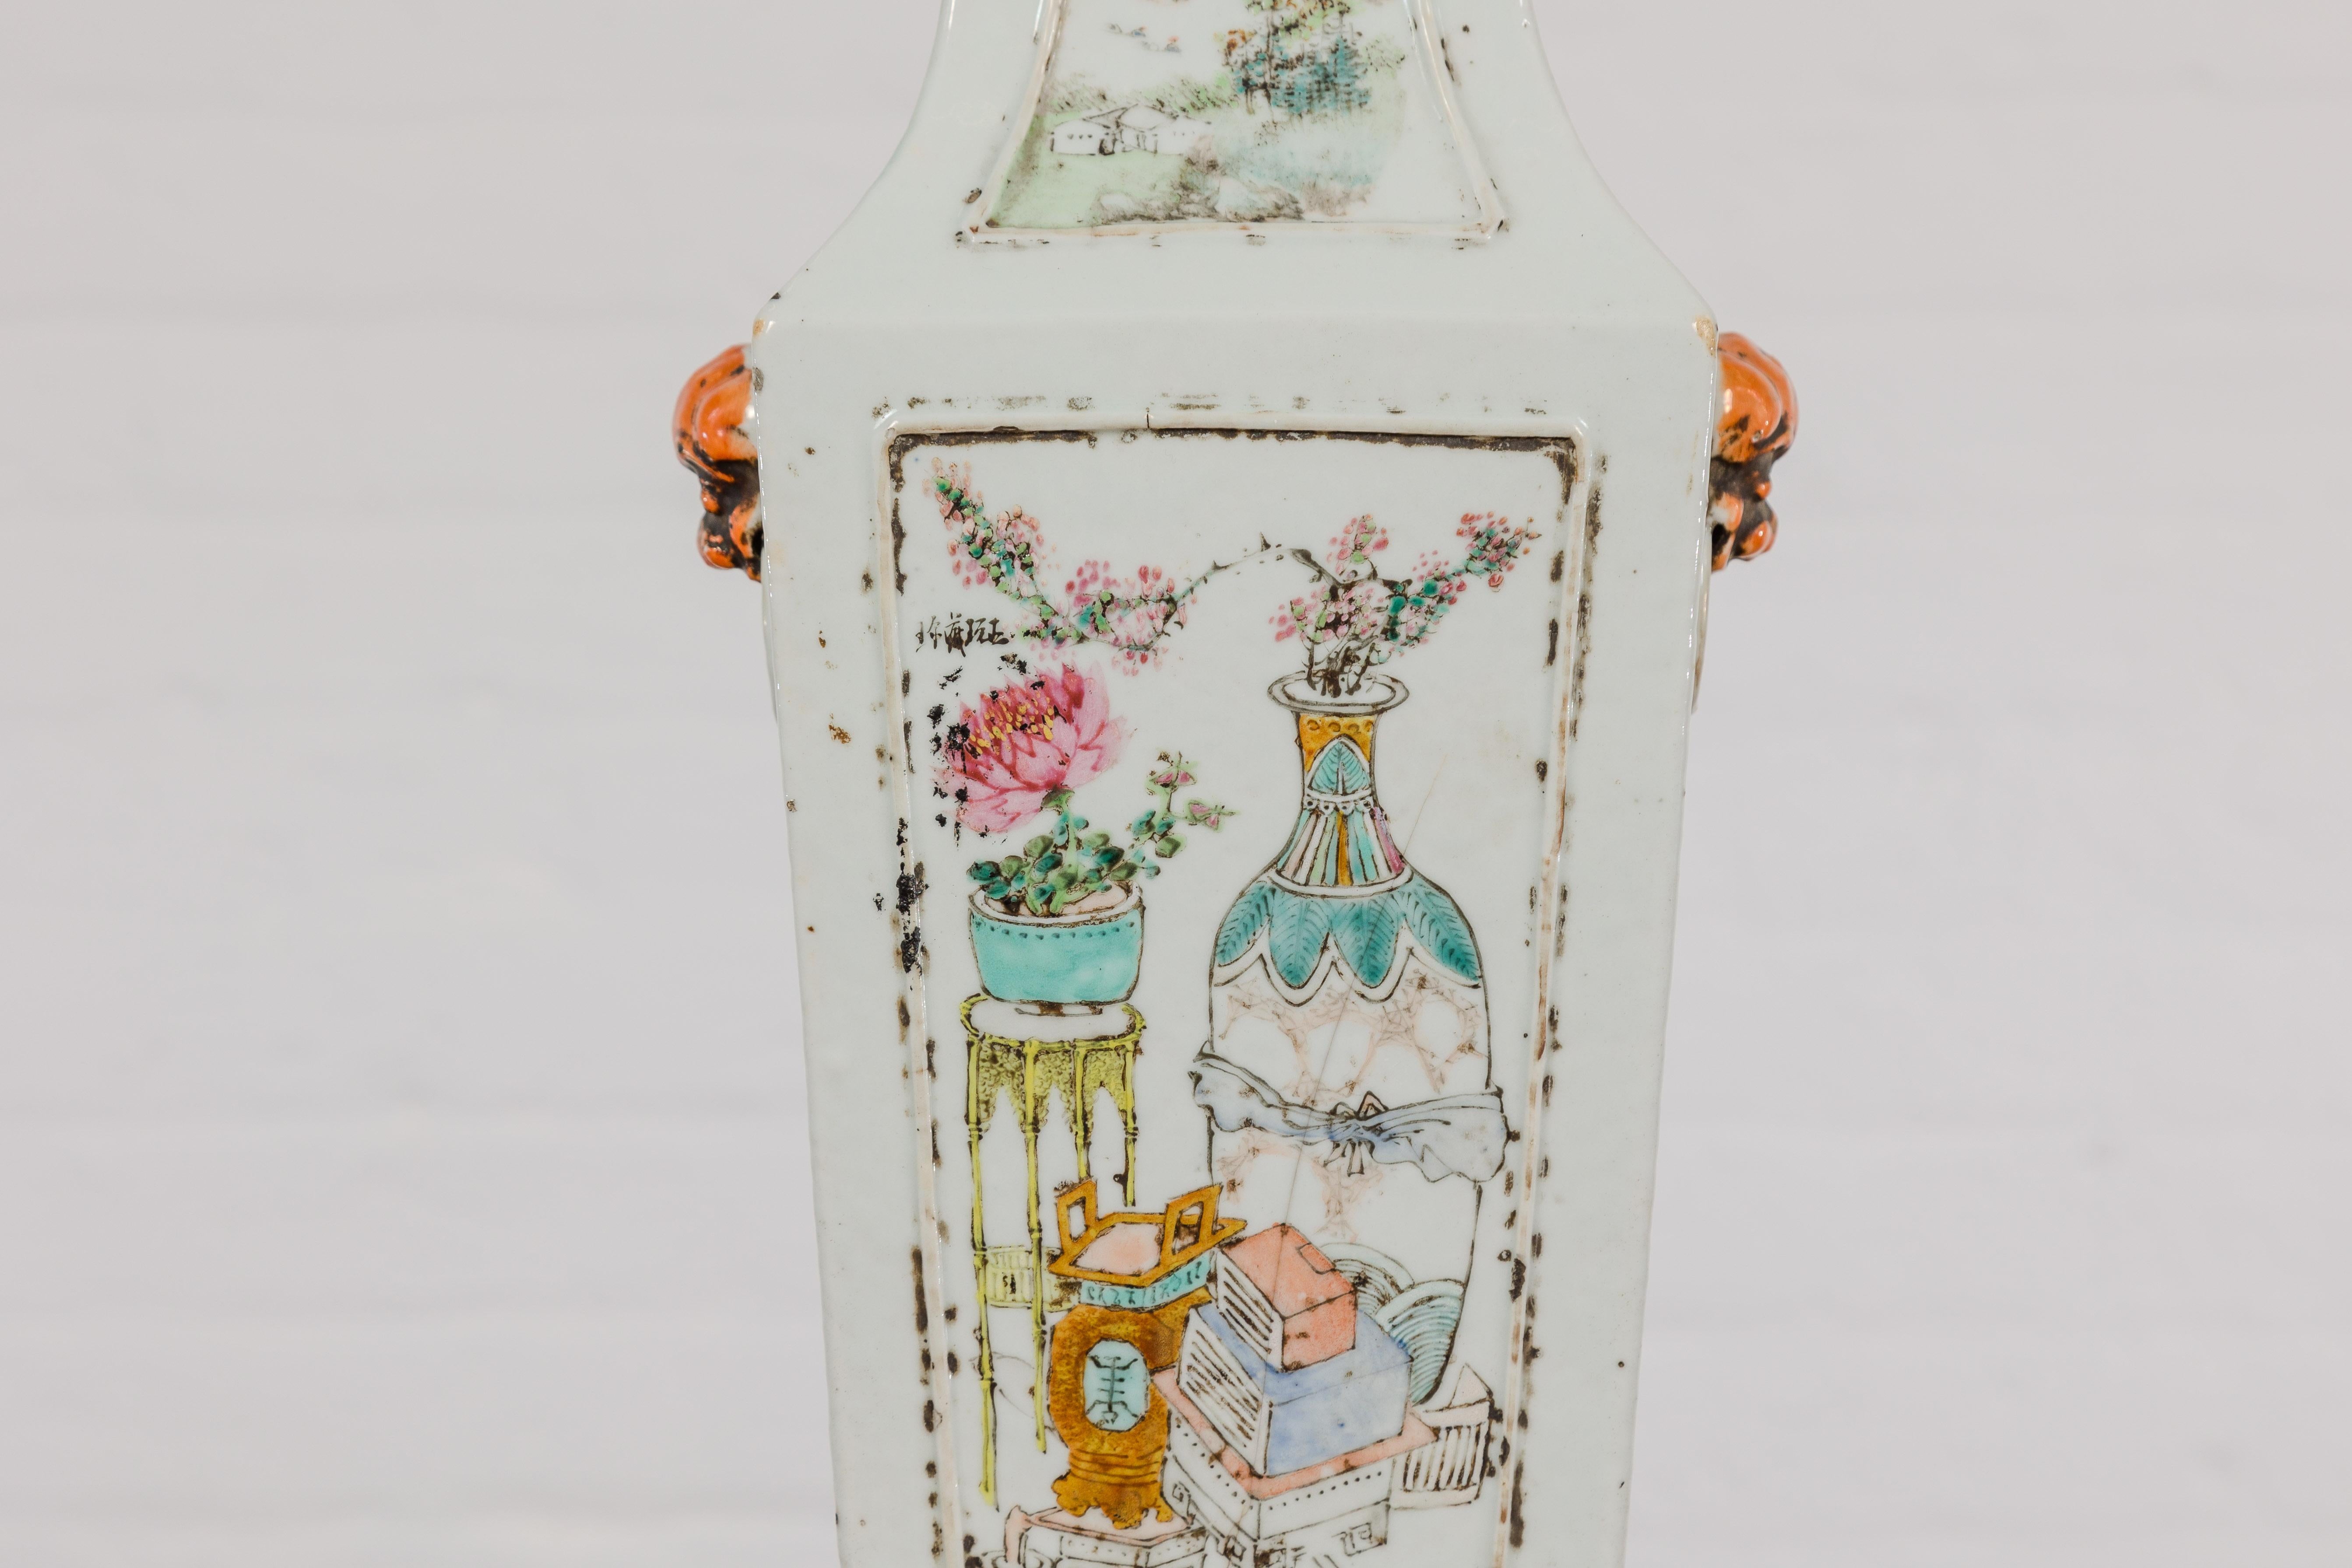 Qing Dynasty White Porcelain Vase with Painted Flowers, Objects and Calligraphy In Good Condition For Sale In Yonkers, NY